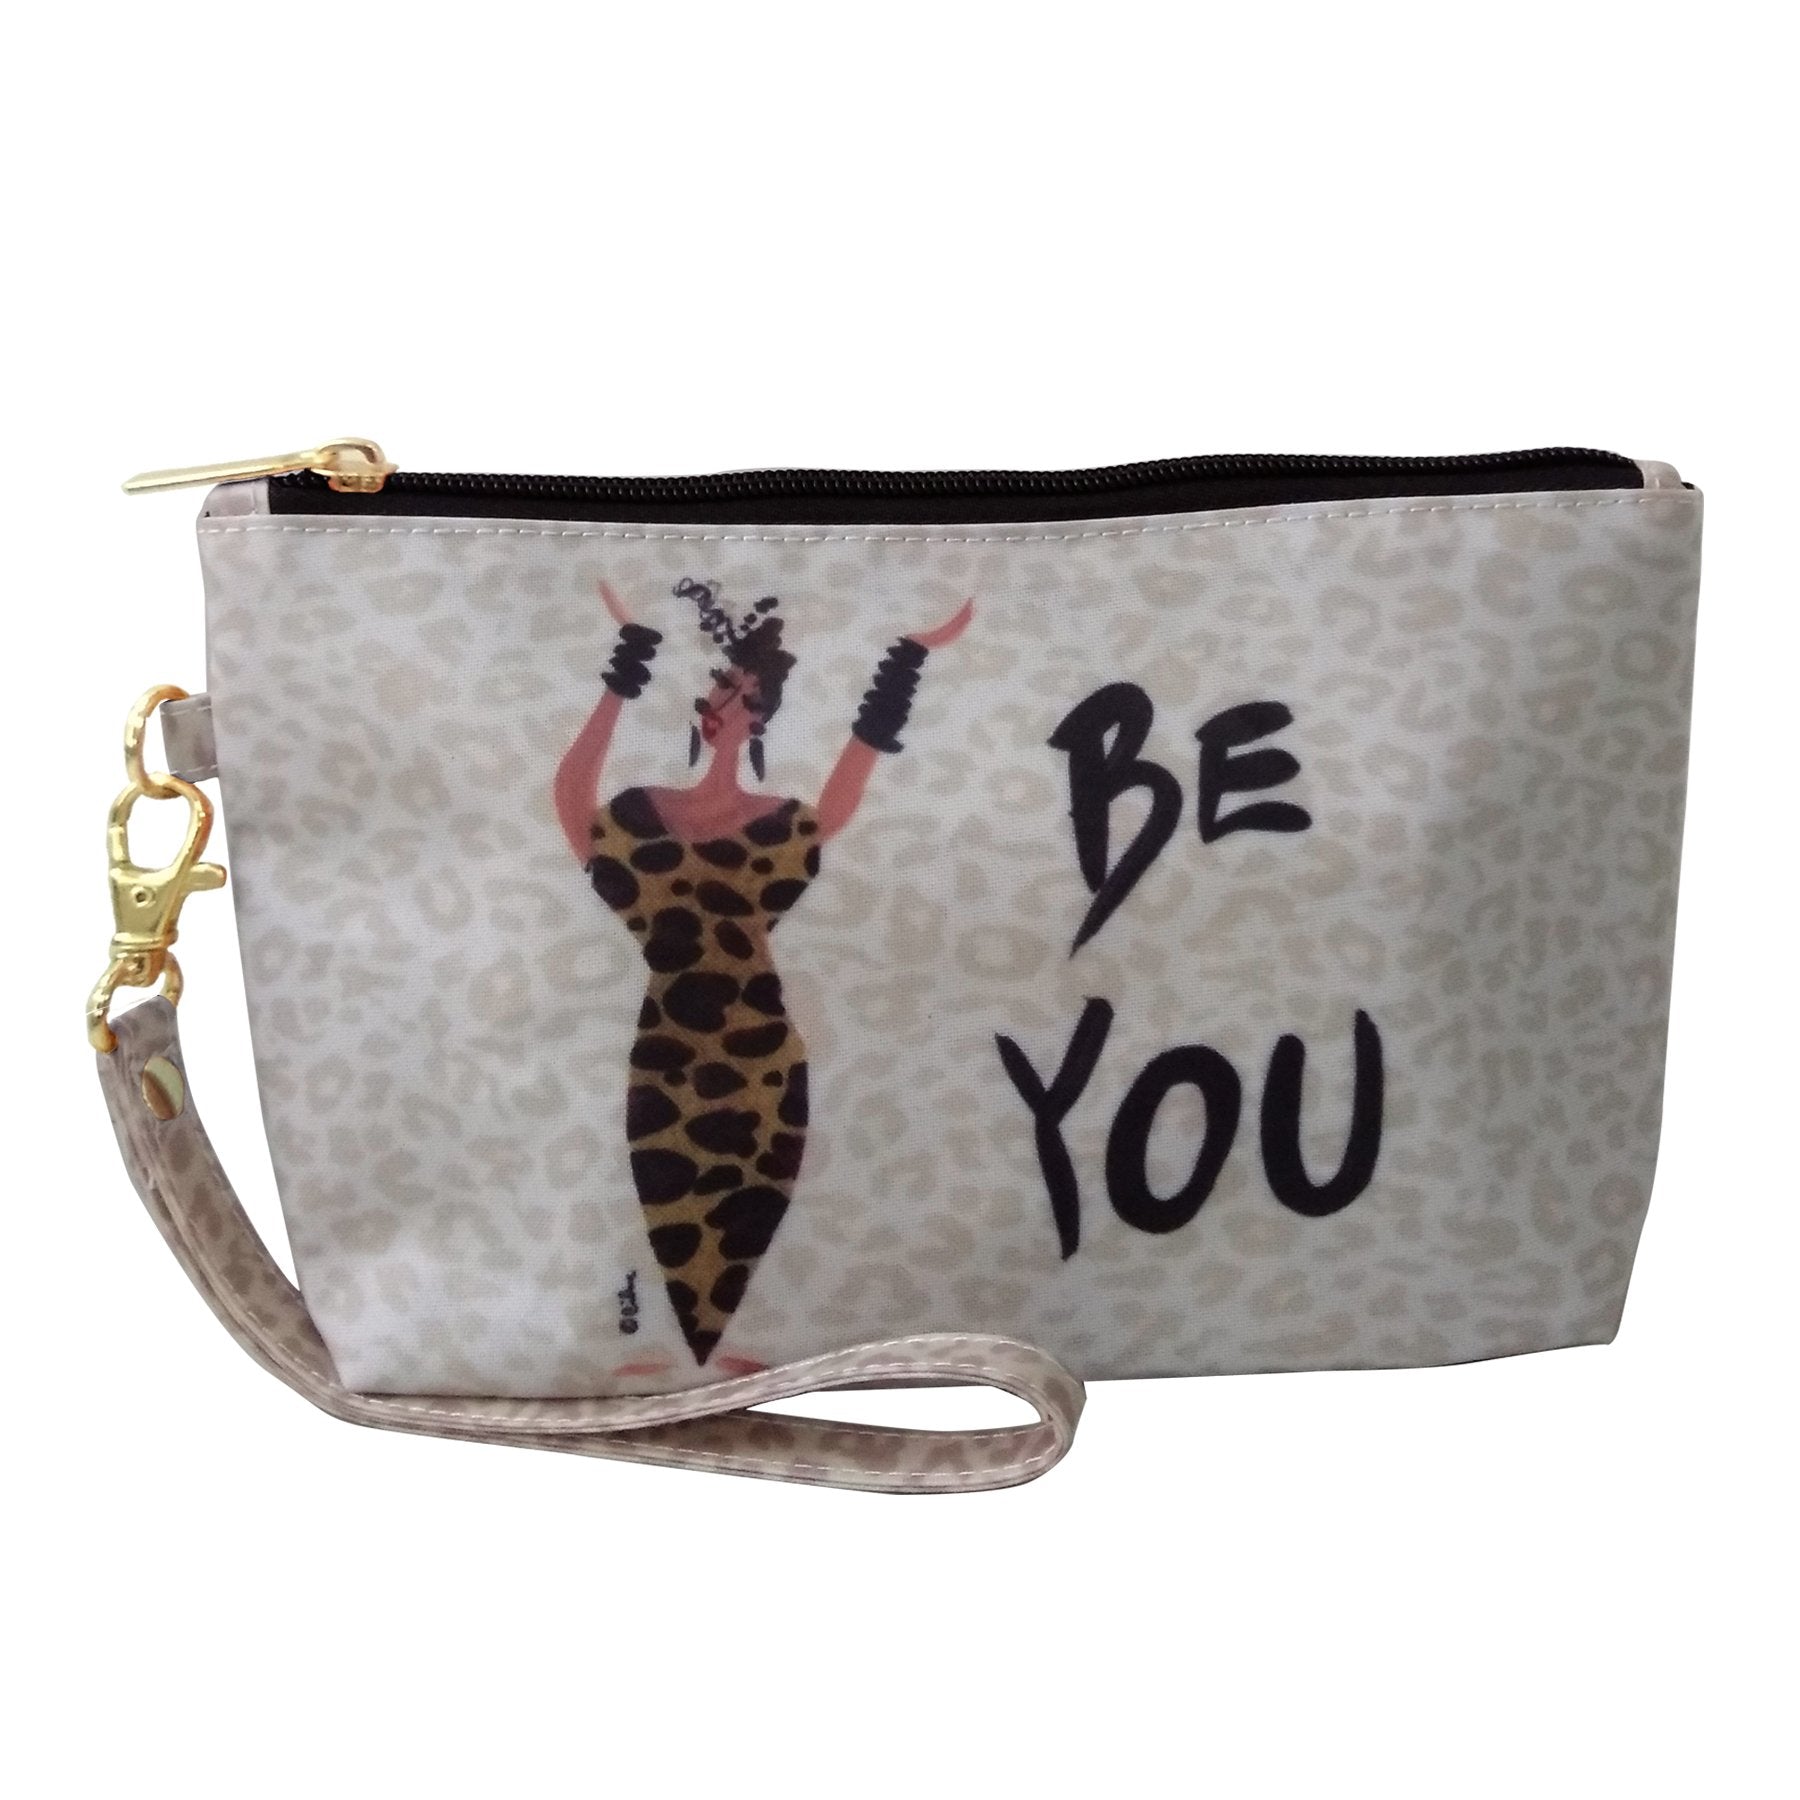 1 of 2: Be You: African American Cosmetic Bag by Cidne Wallace